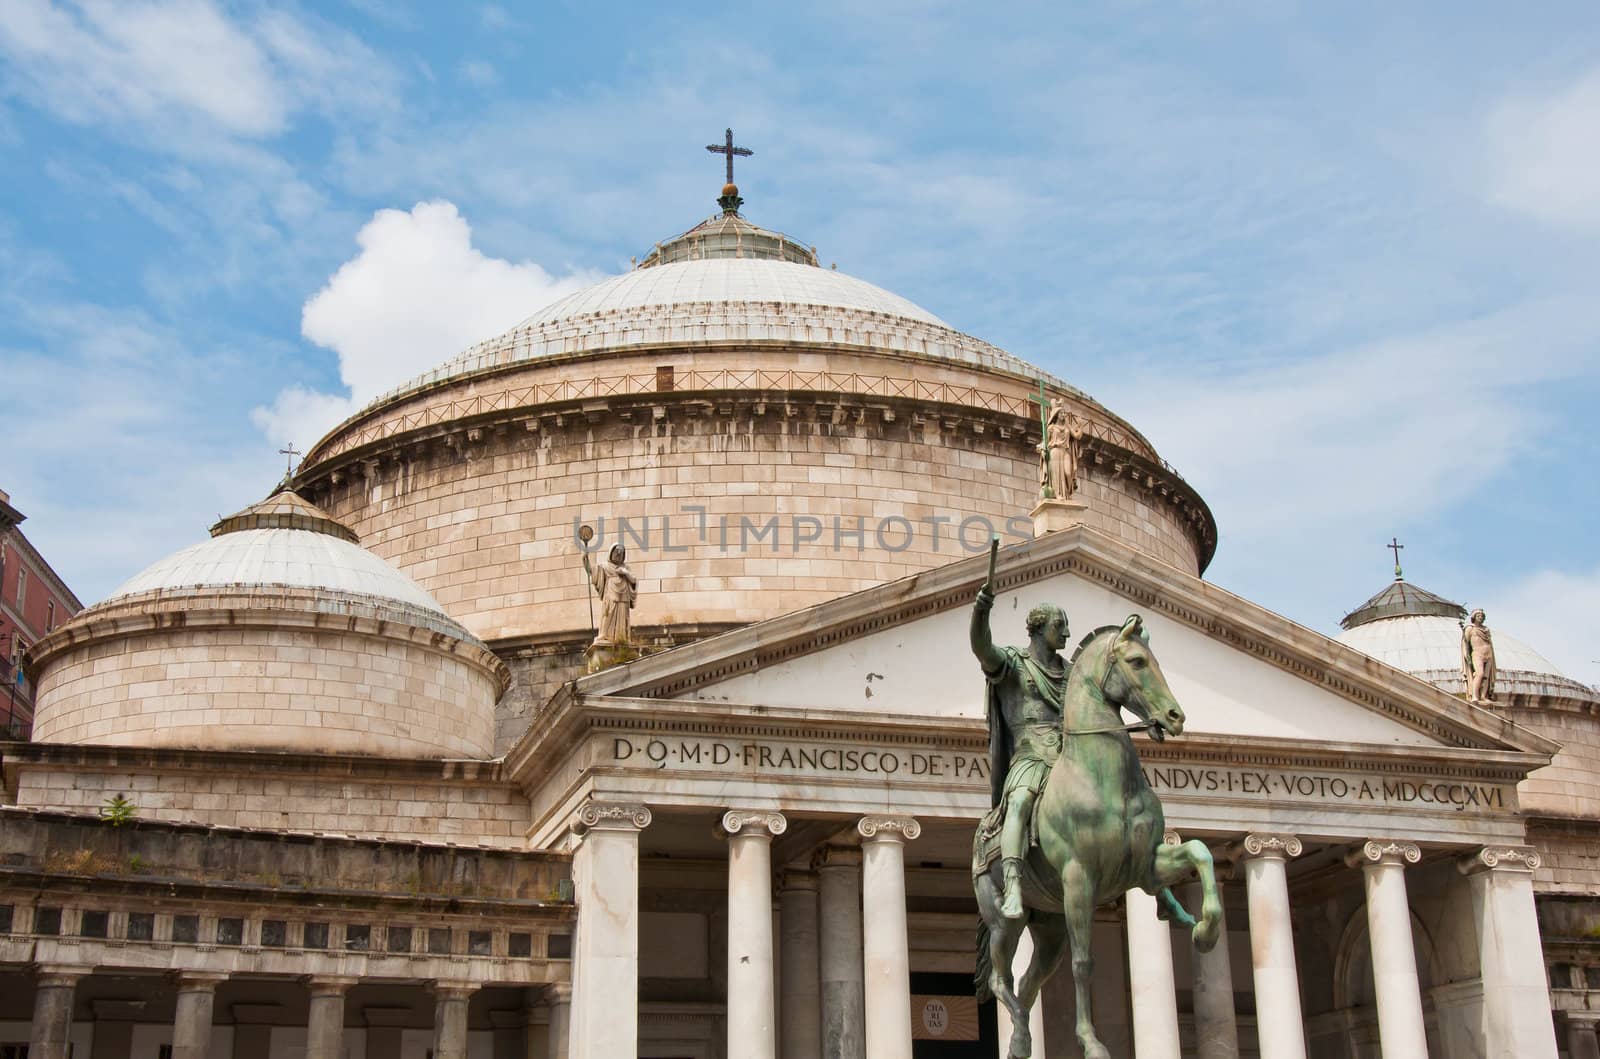 view and details of piazza plebiscito in naples, italy